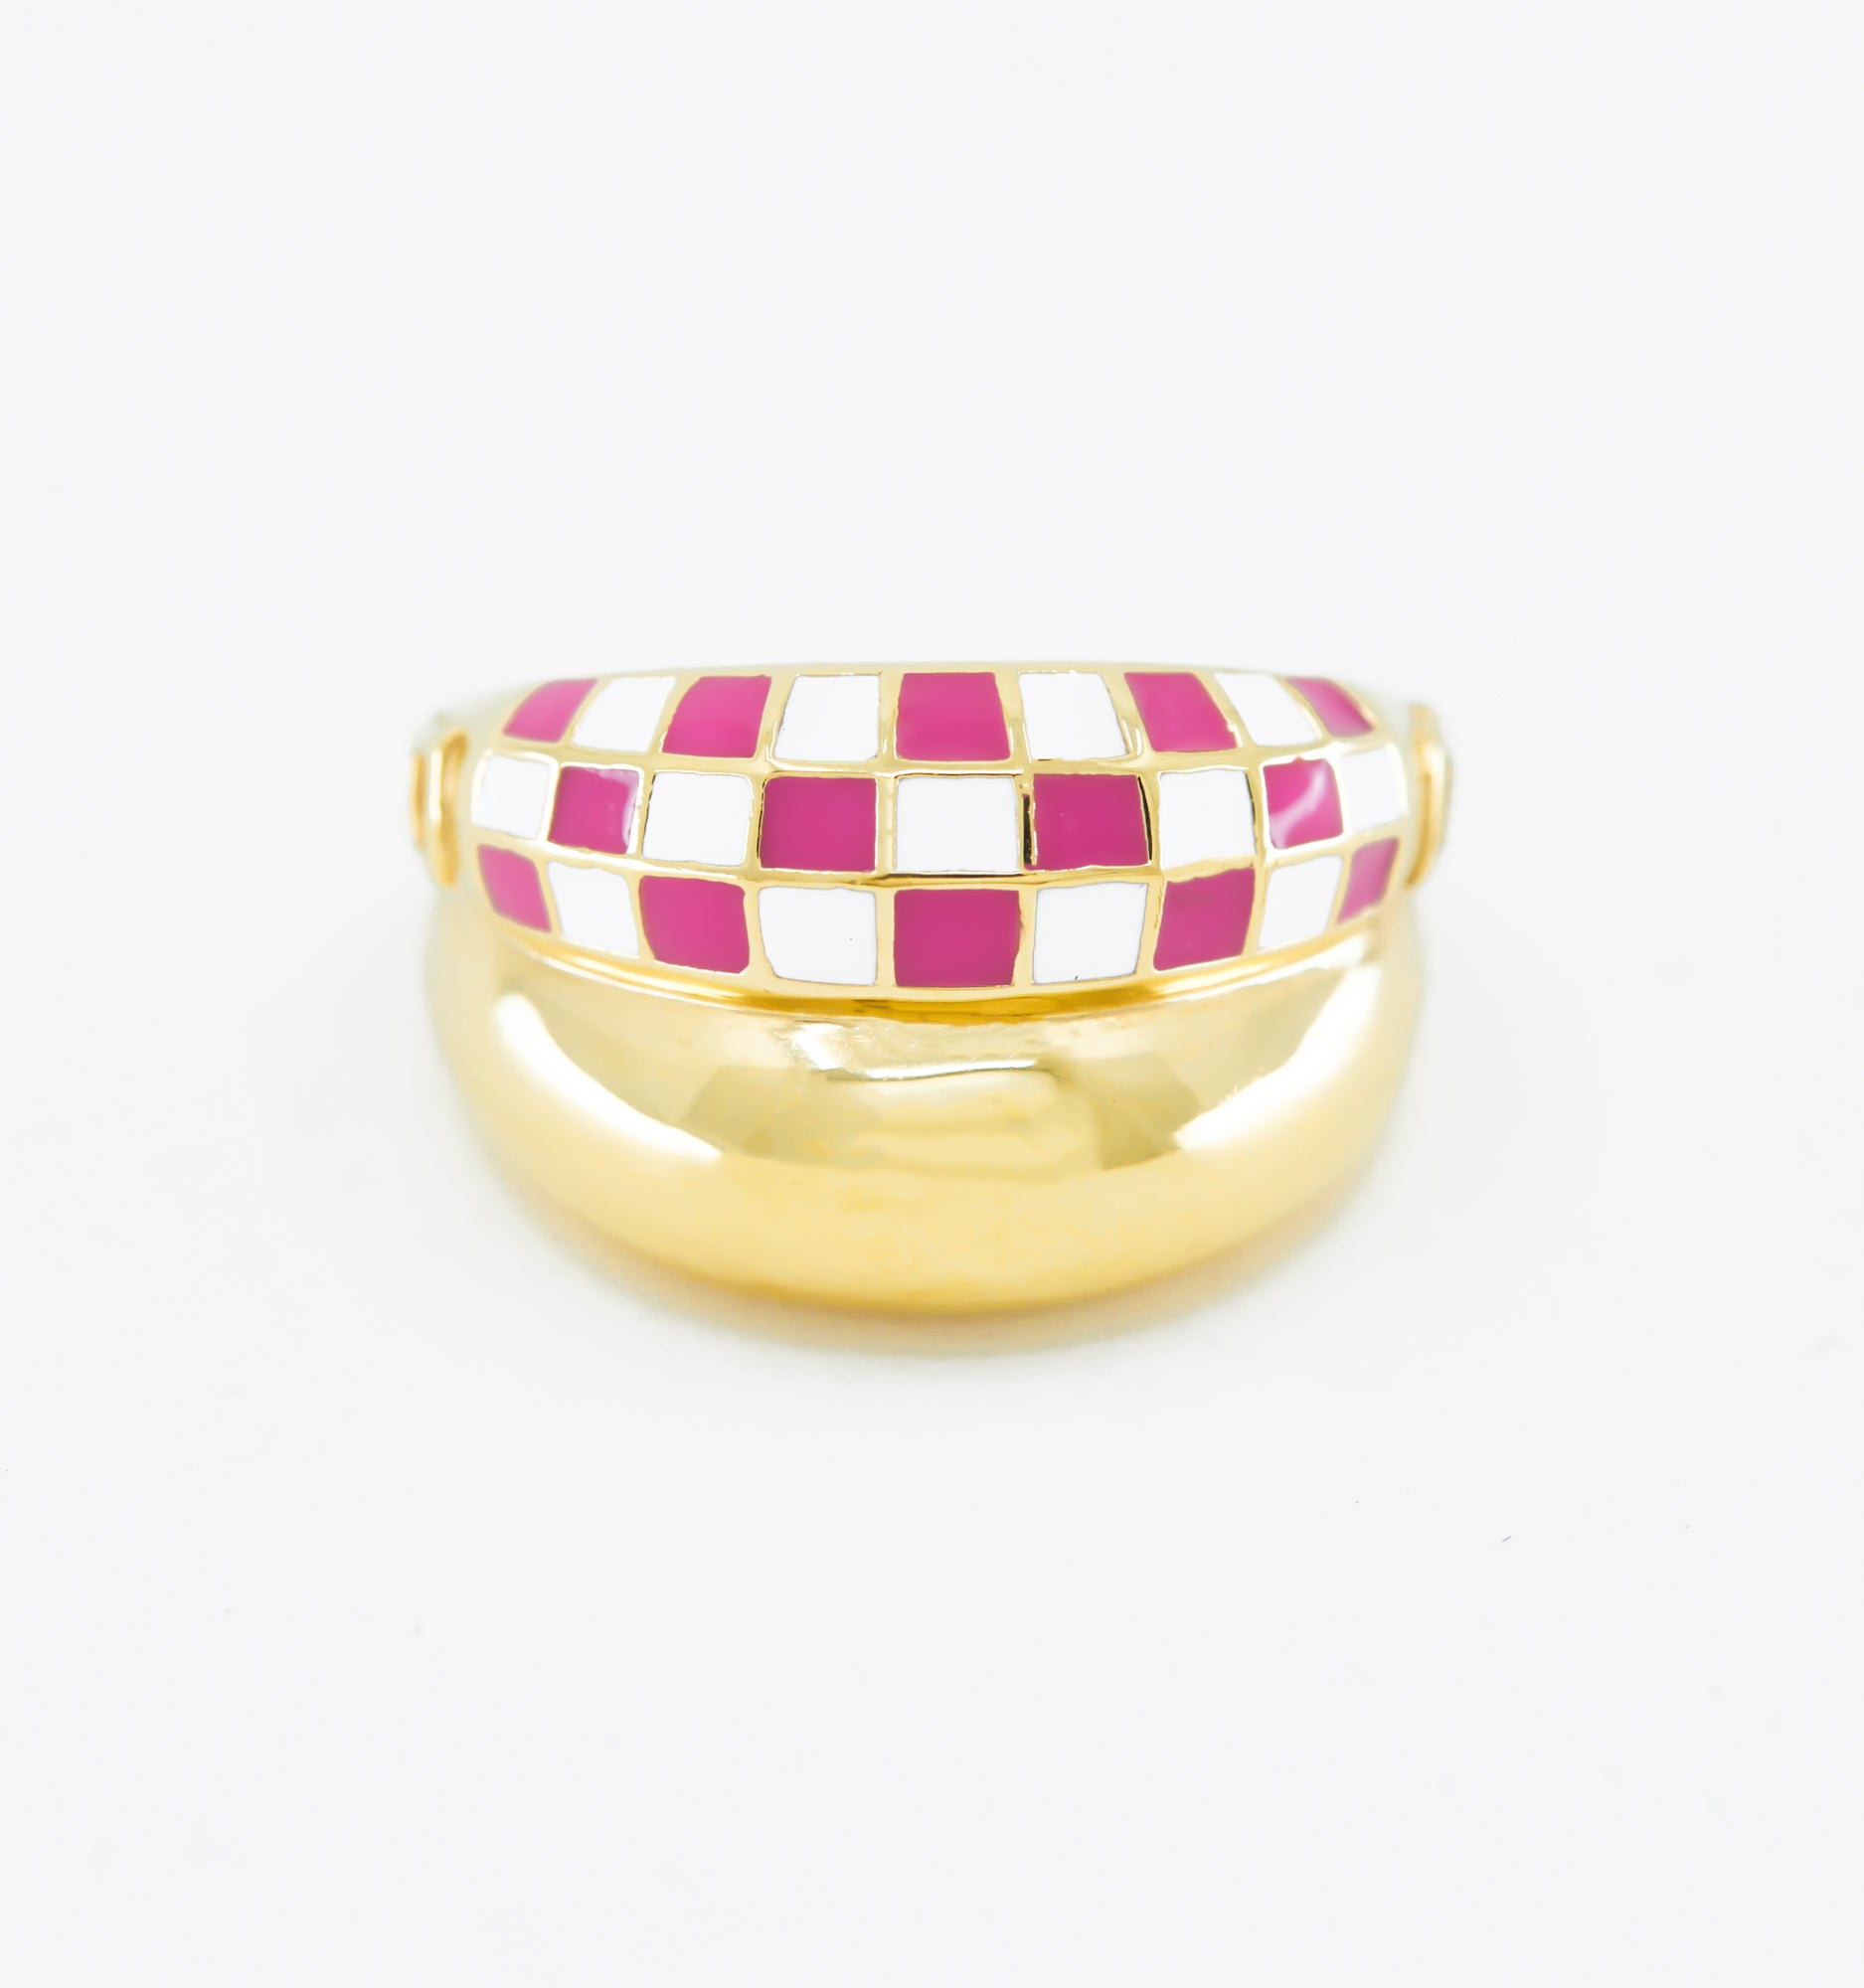 Double Checker Ring - Pink And White